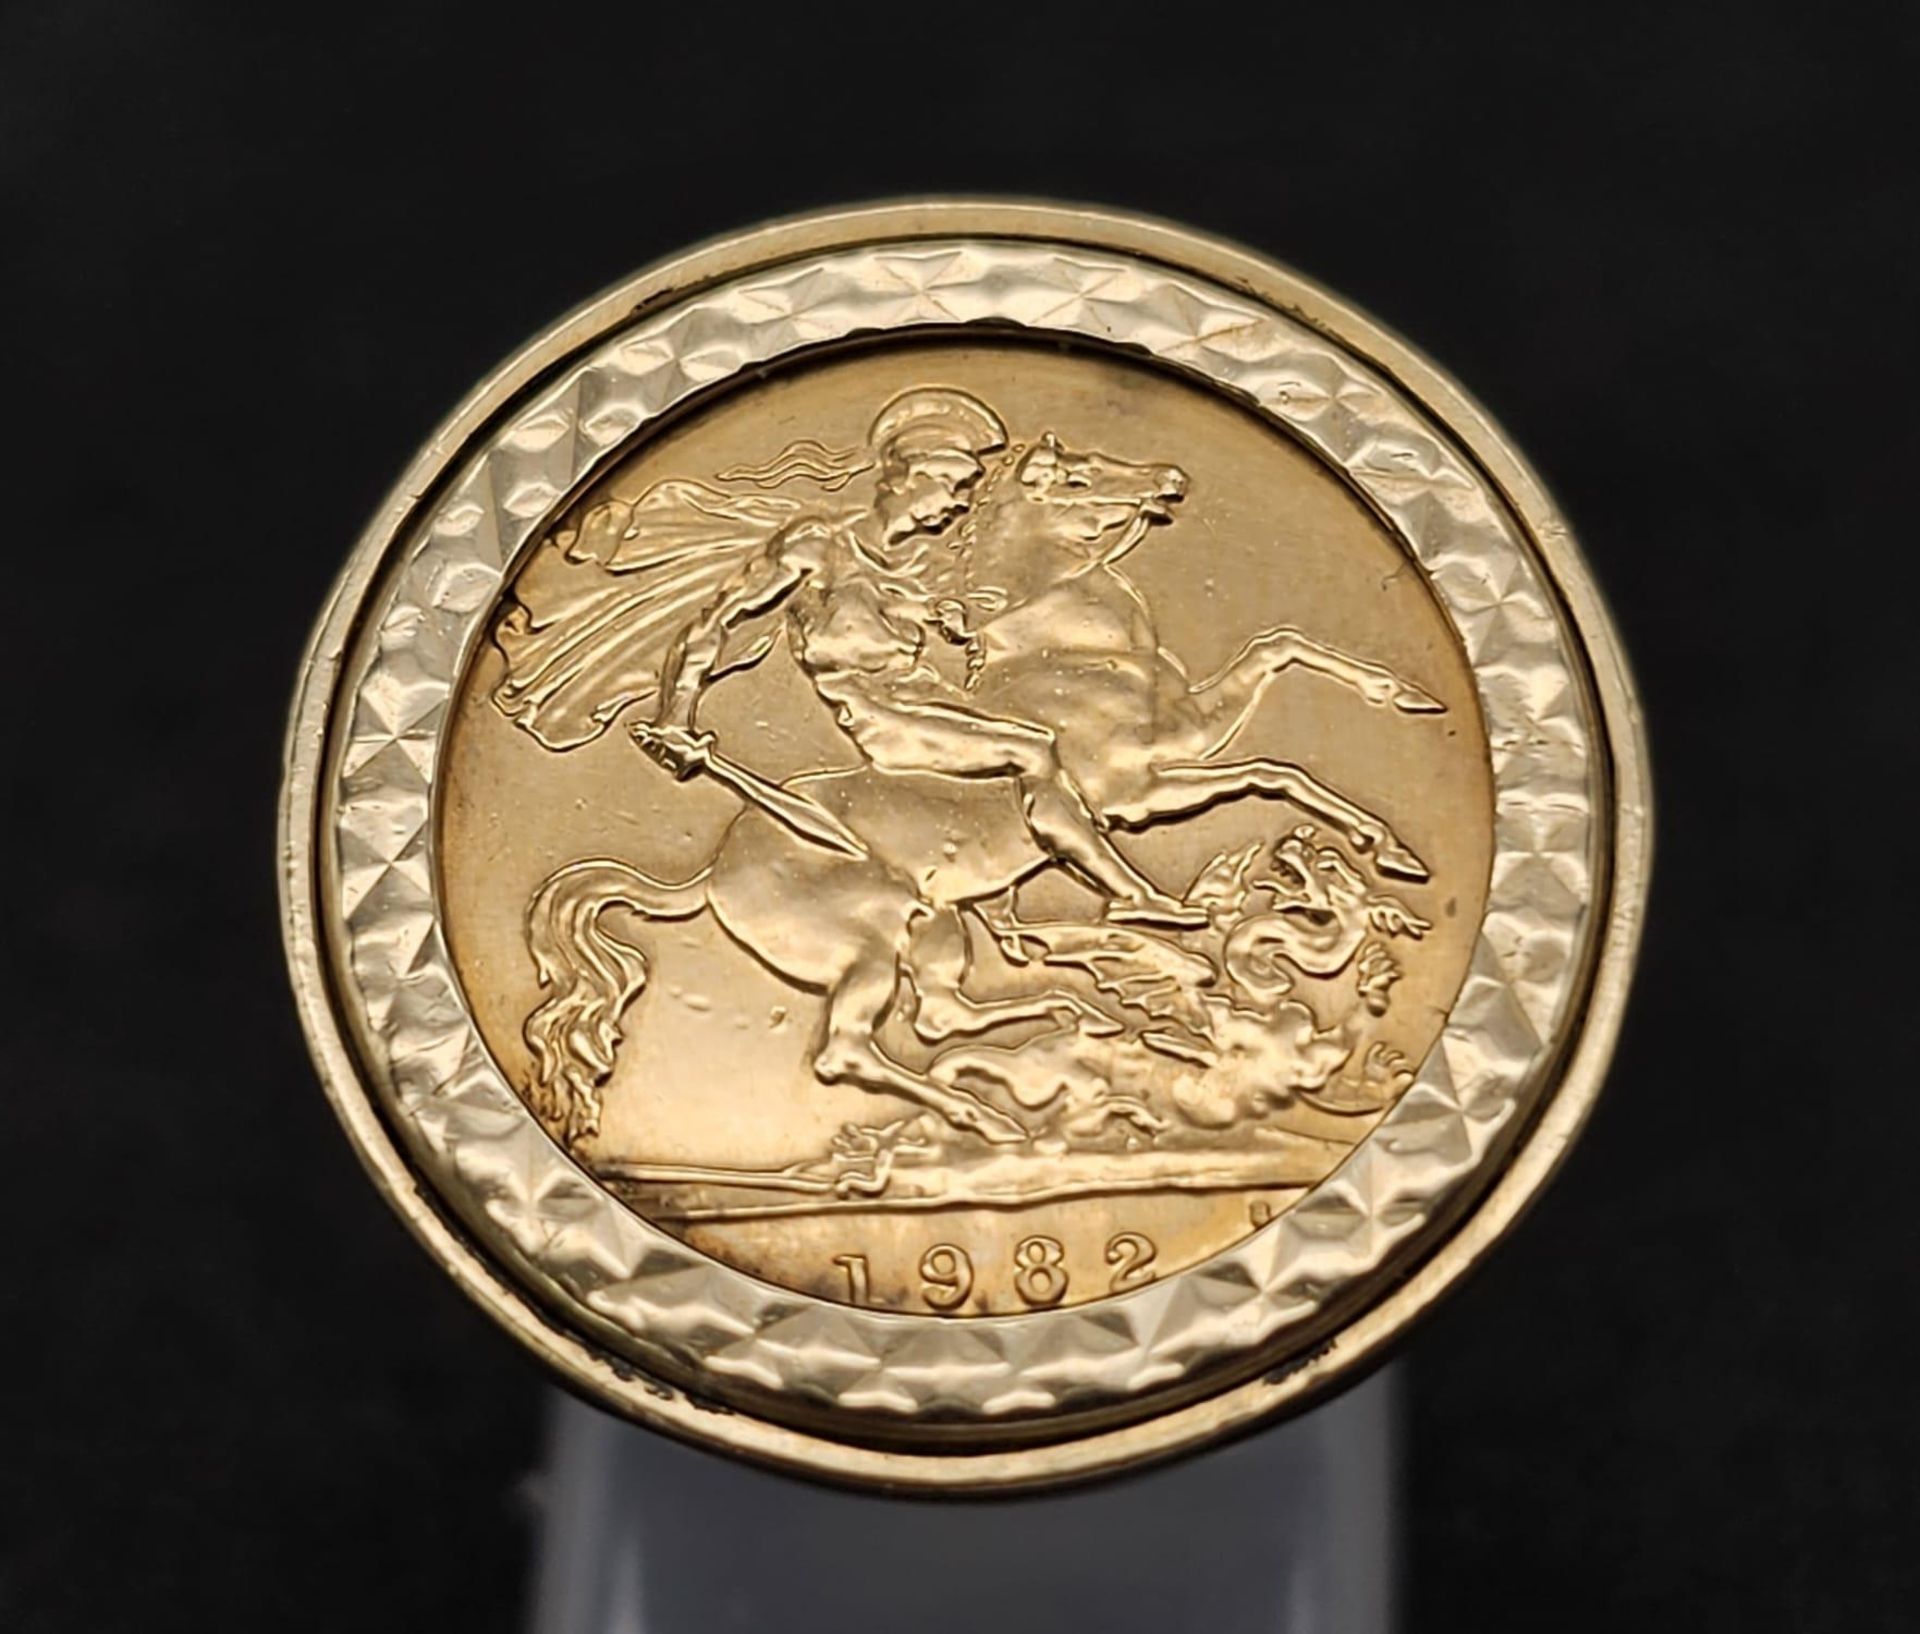 22k yellow gold half sovereign coin, dated 1982 with Queen Elizabeth, set into a 9k yellow gold ring - Bild 4 aus 8